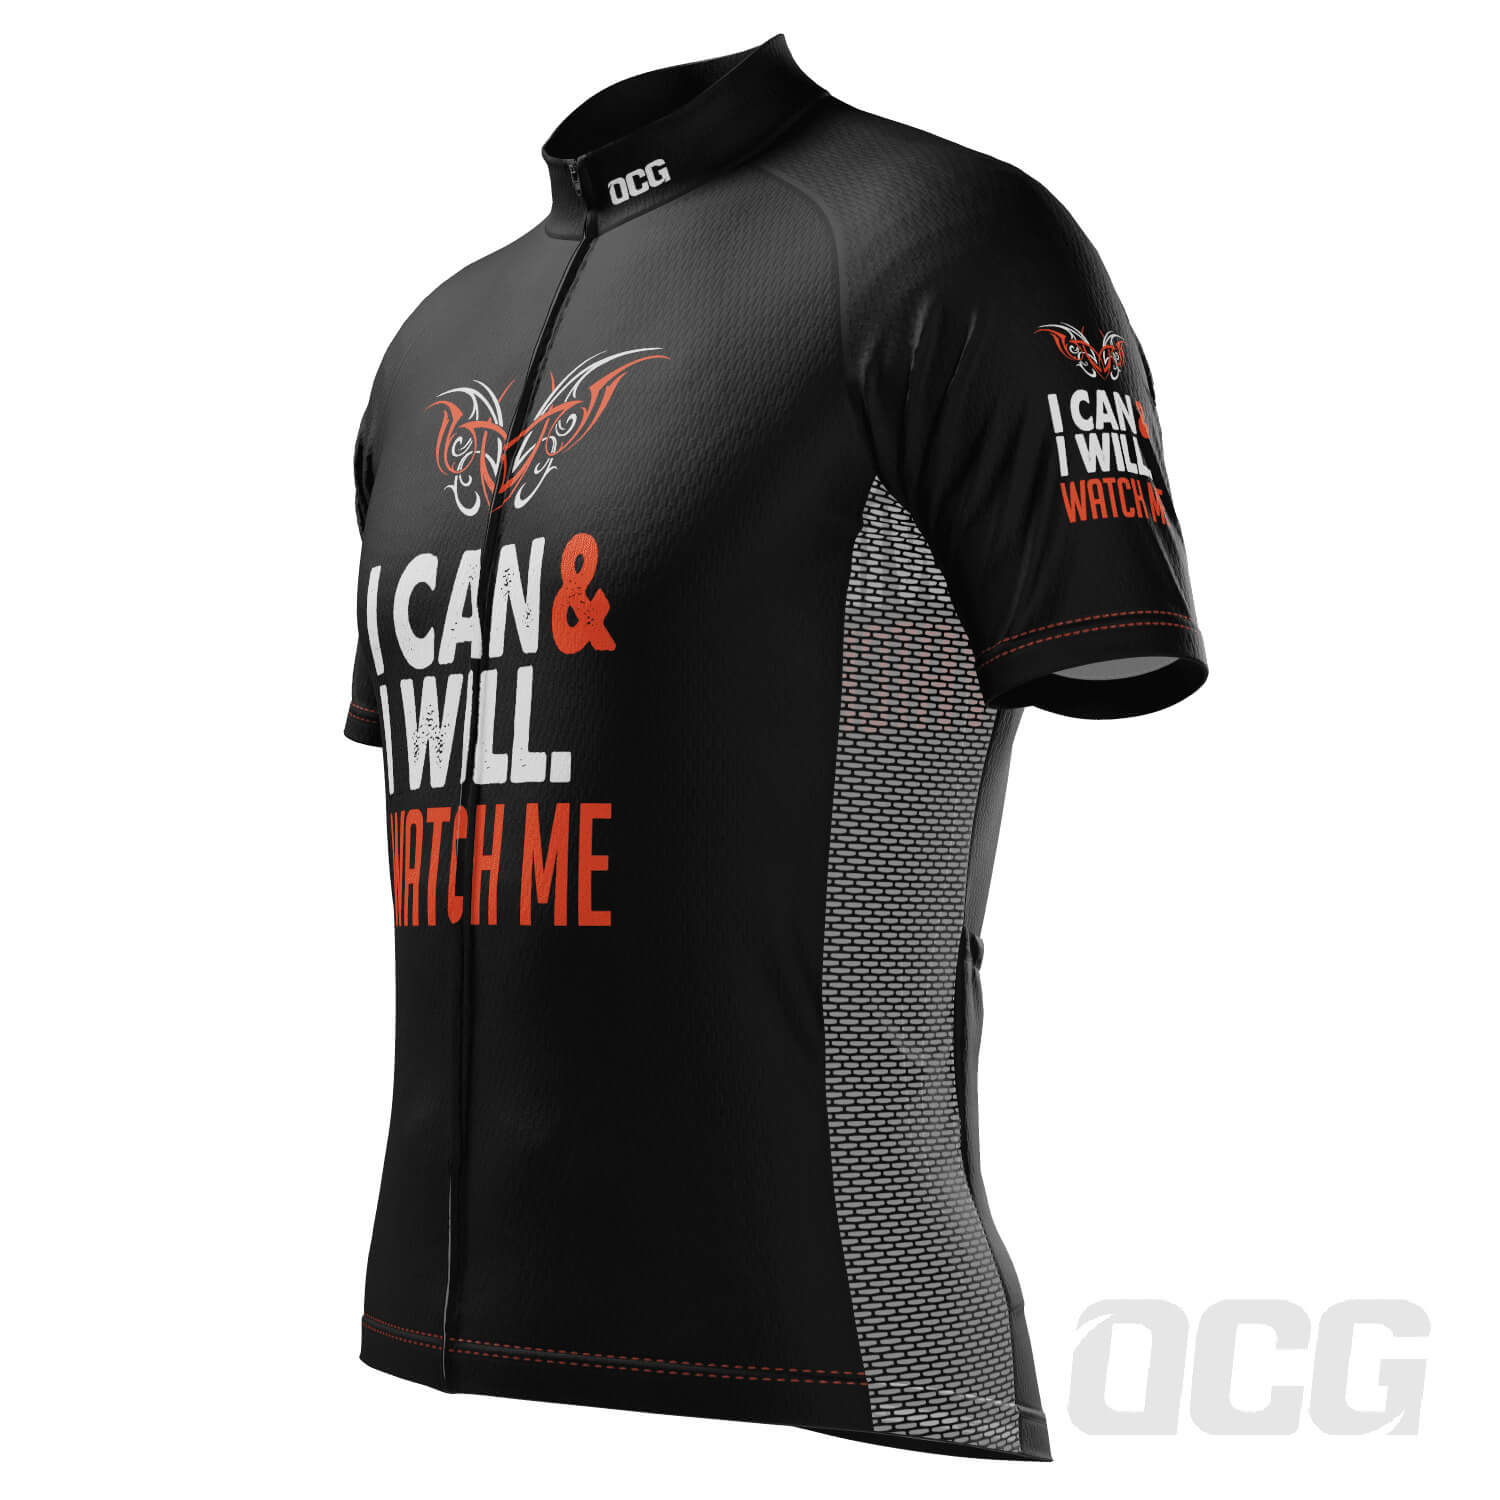 Men's I Can I Will. Watch Me Short Sleeve Cycling Jersey